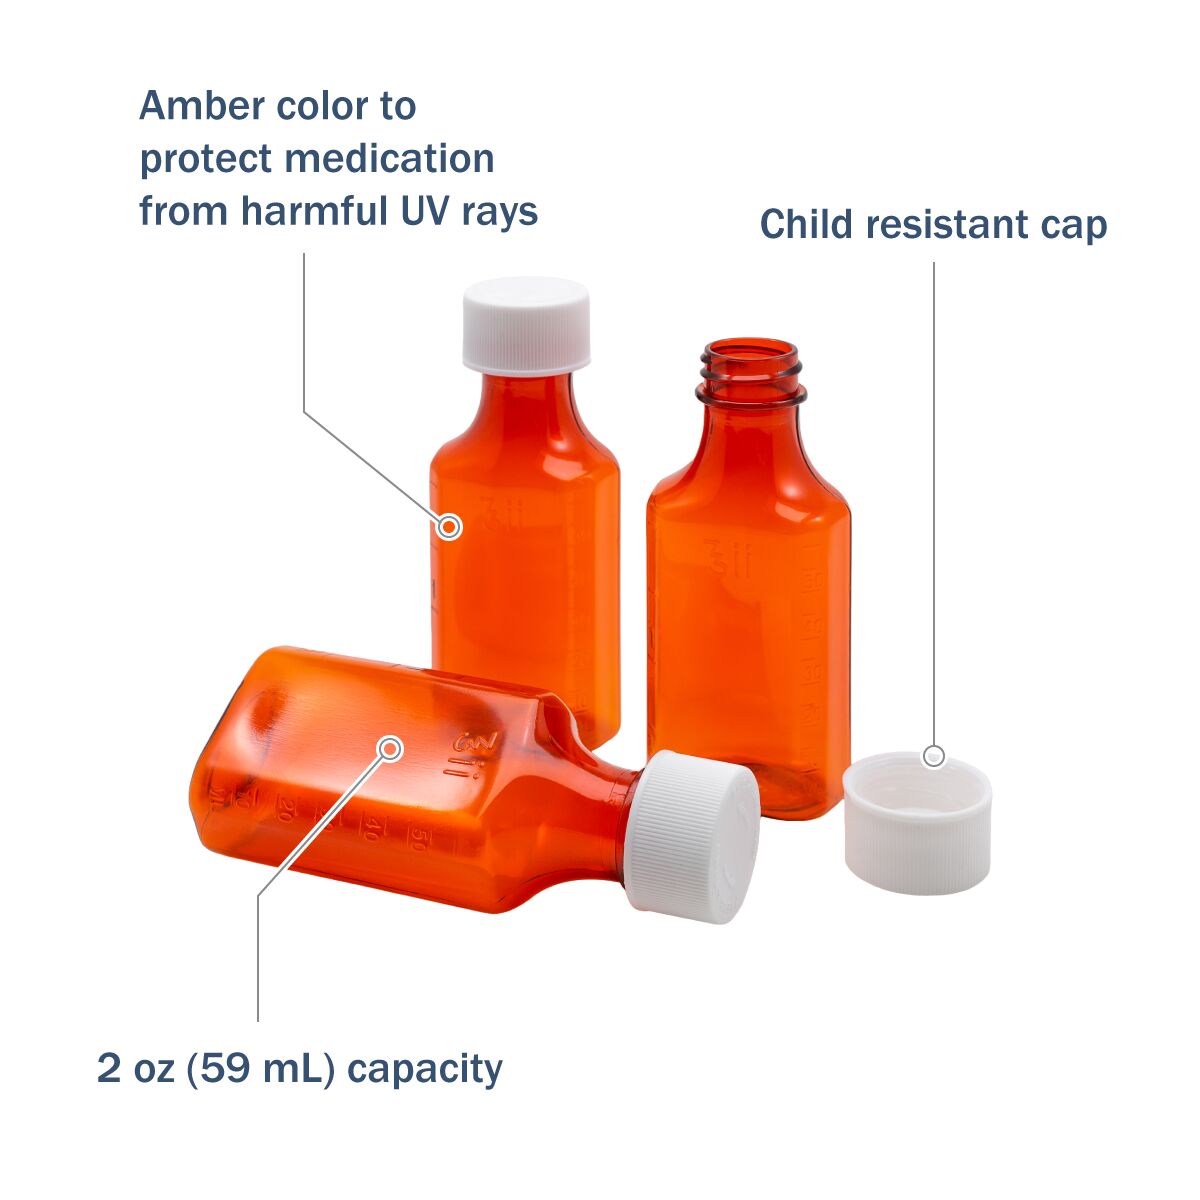 The amber color protects medication from harmful UV rays and has a child resistant cap